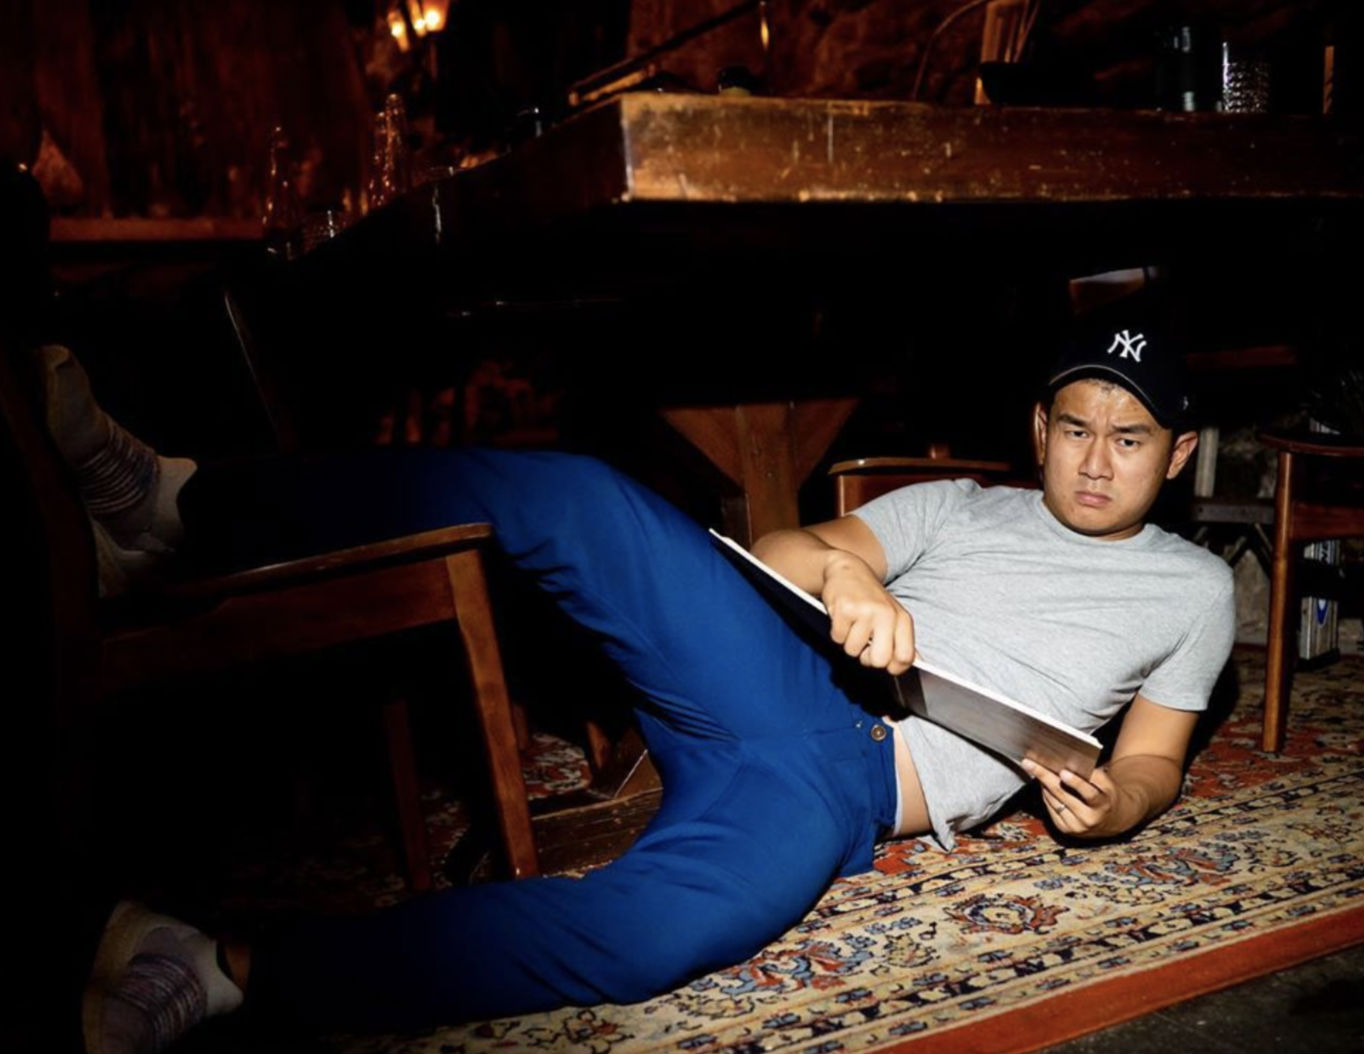 Malaysia-born comedian Ronny Chieng. Image: Instagram